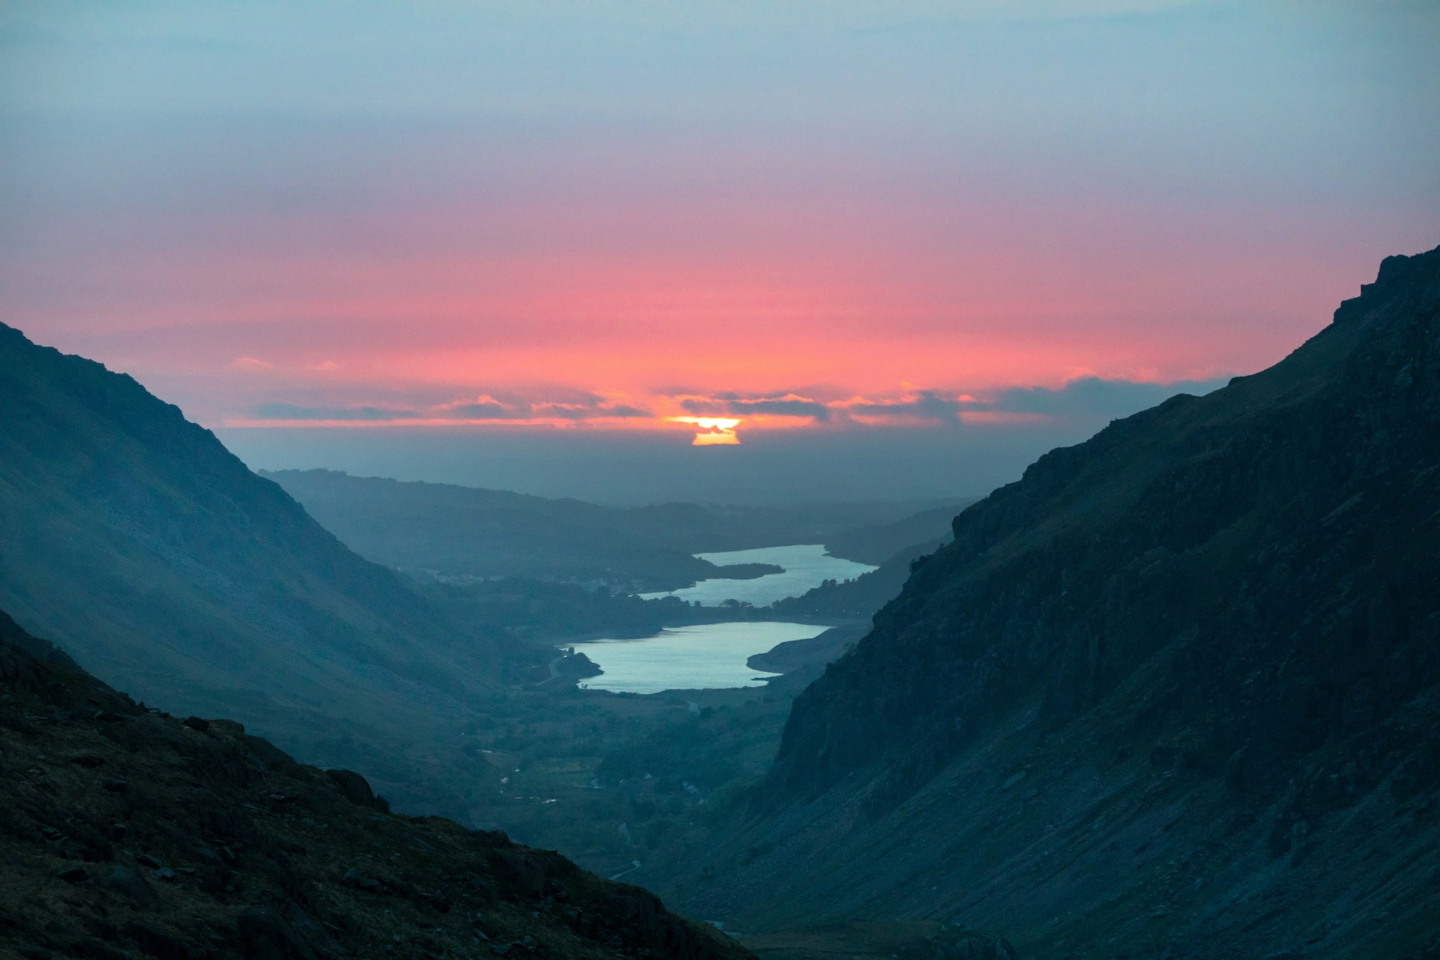 A view from the top of Mount Snowdon at sunset time